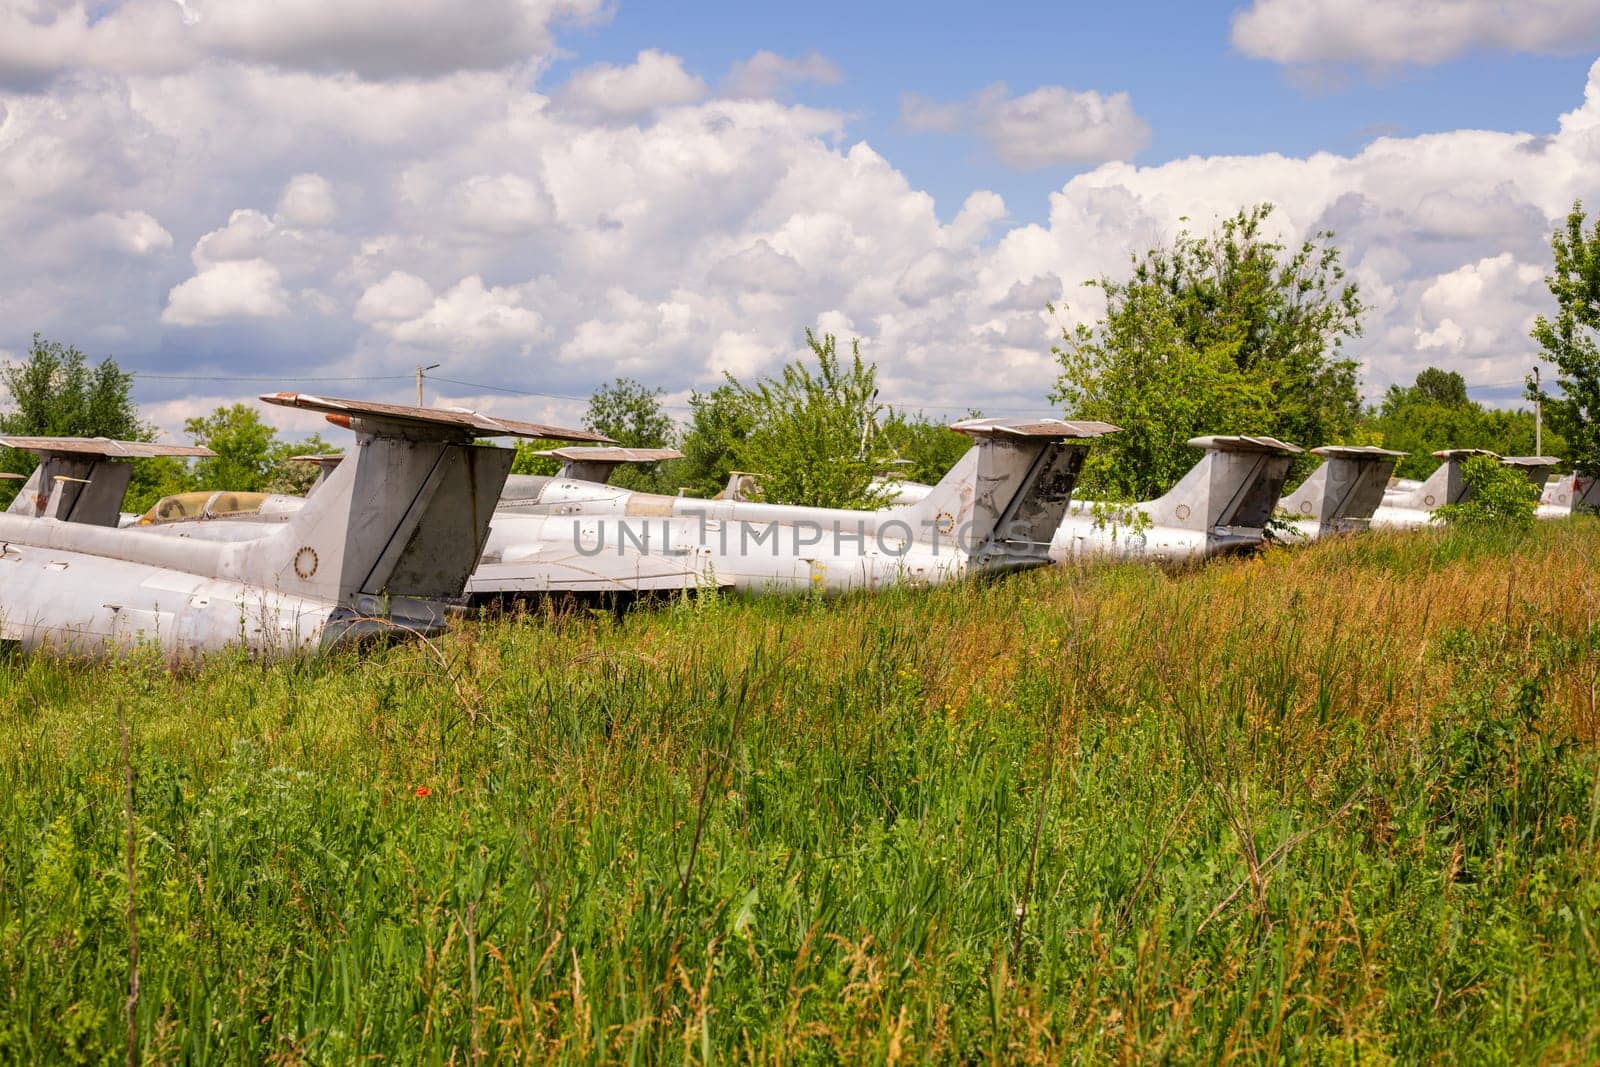 Old abandoned airfield with abandoned planes. Abandoned rusty old planes on the grass